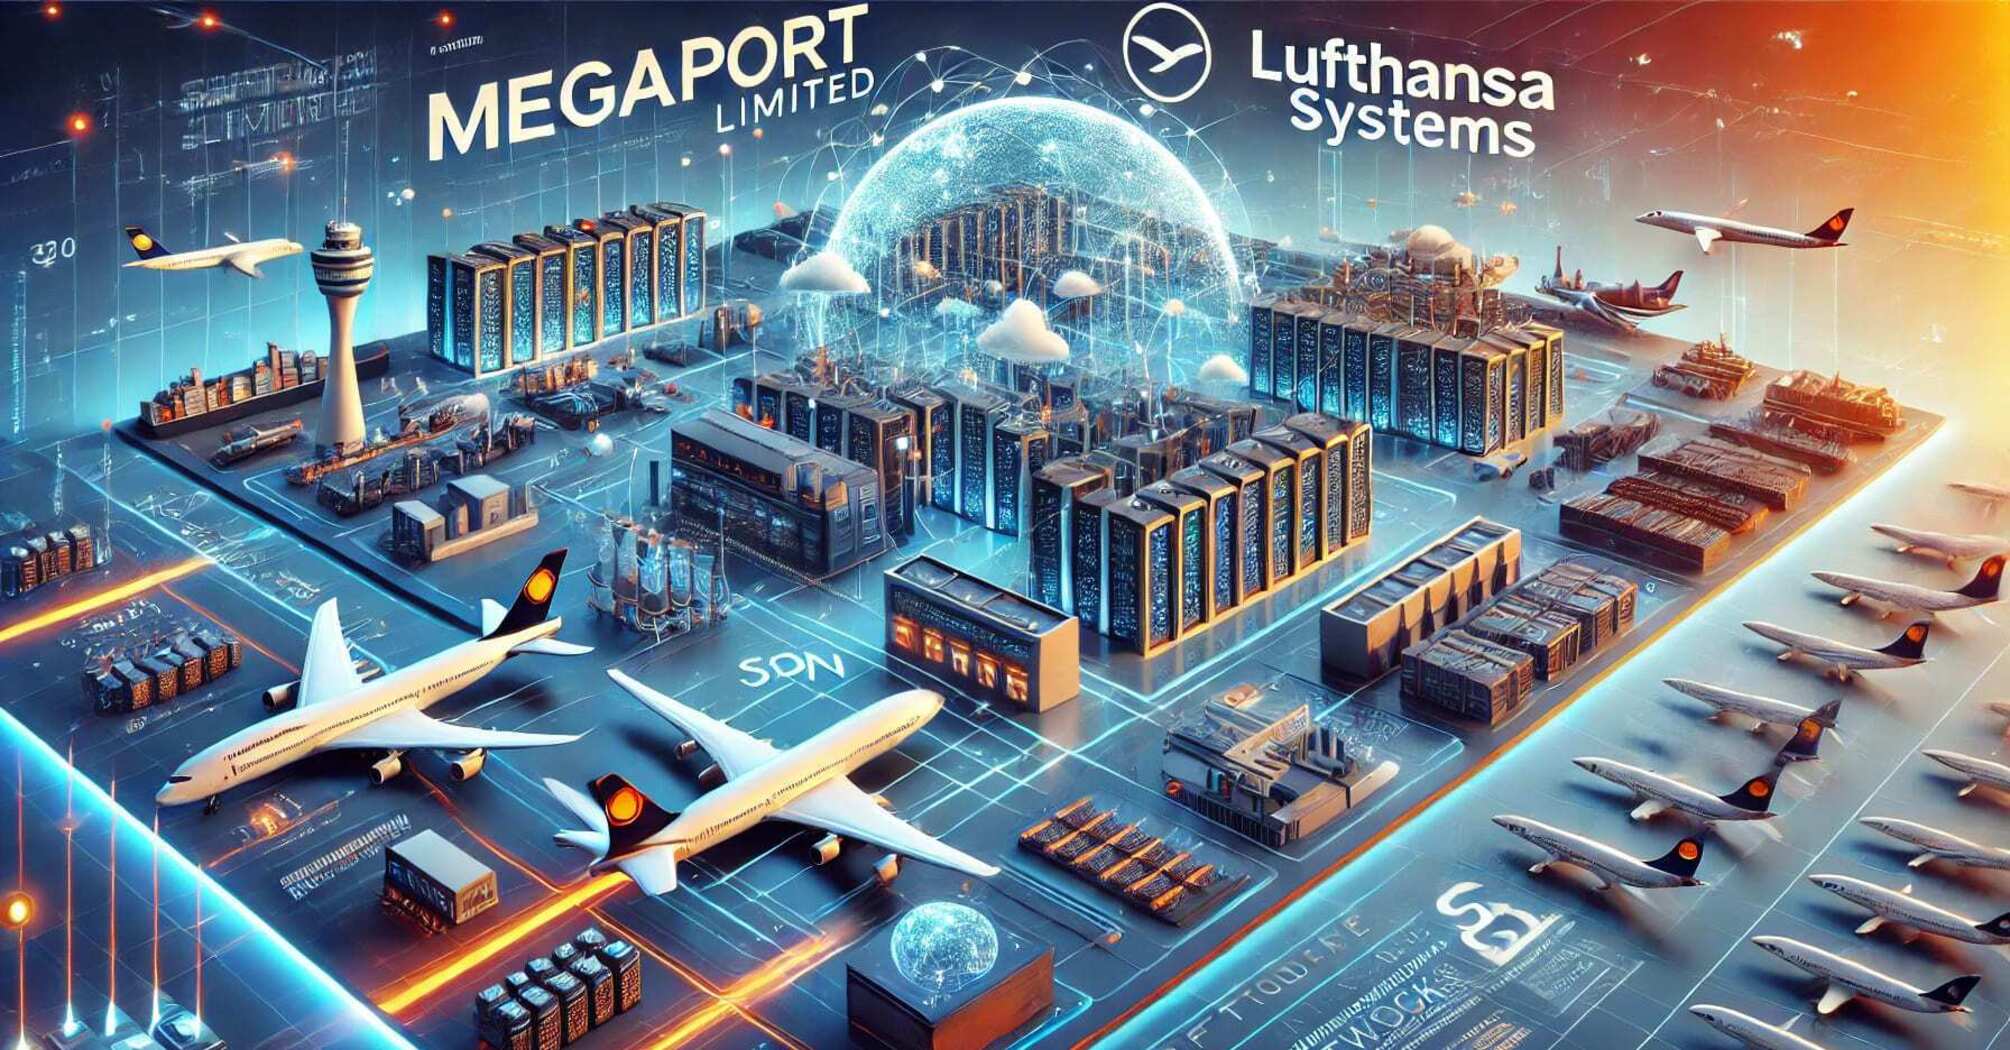 Illustration of Megaport and Lufthansa Systems partnership enhancing aviation technology with interconnected global airlines and digital networks